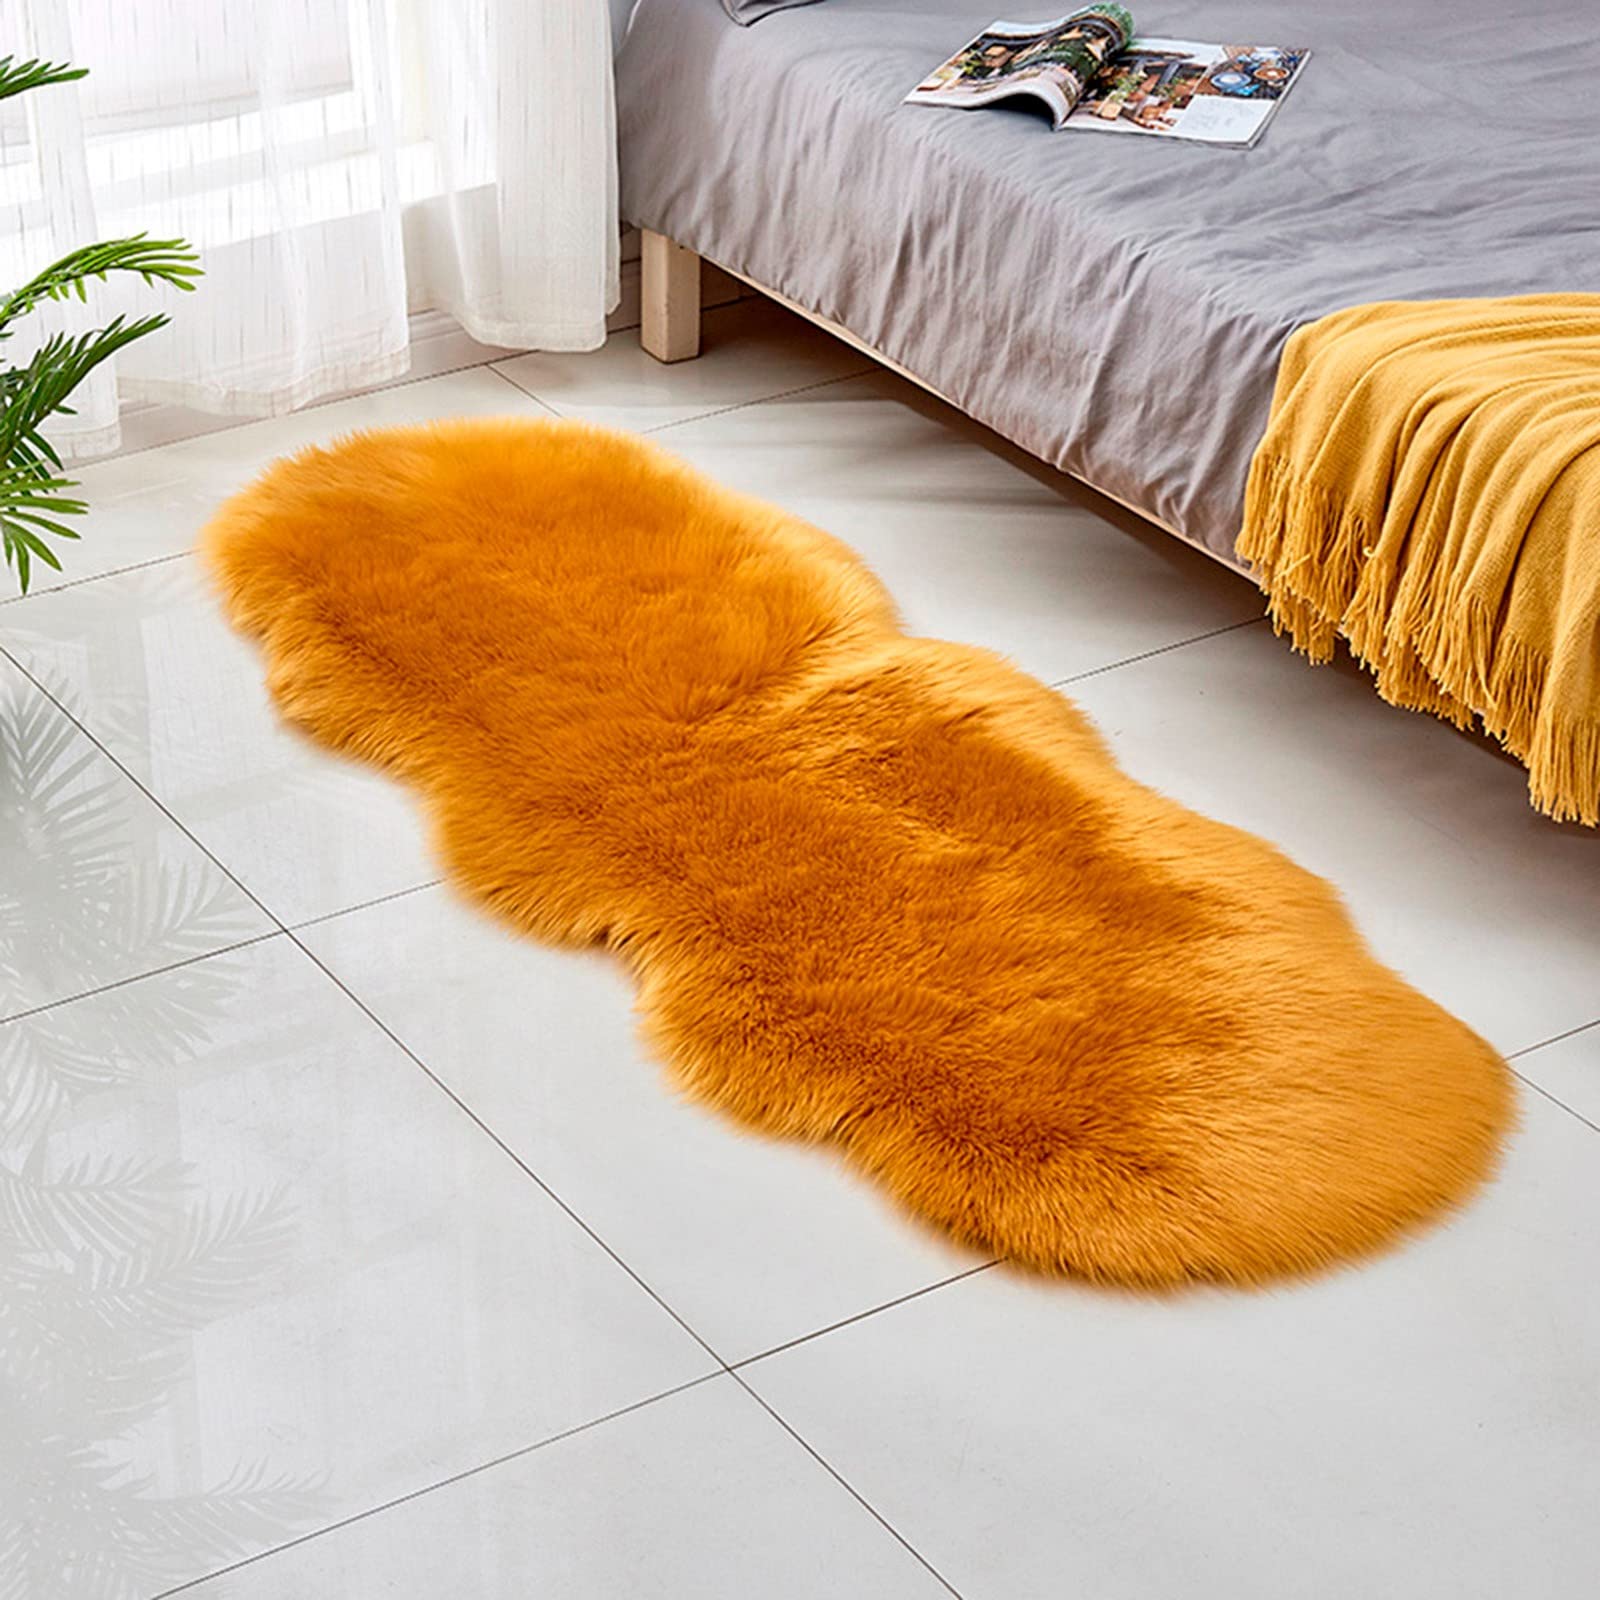 Ultra Soft Faux Fur Rug - 2x5 Feet 17 Colors Faux Sheepskin Fur Area Rug Shaggy Couch Cover Seat Cushion Furry Carpet Beside Rugs for Indoor Bedroom,Living Room Runner,Dorm Room (Orange)